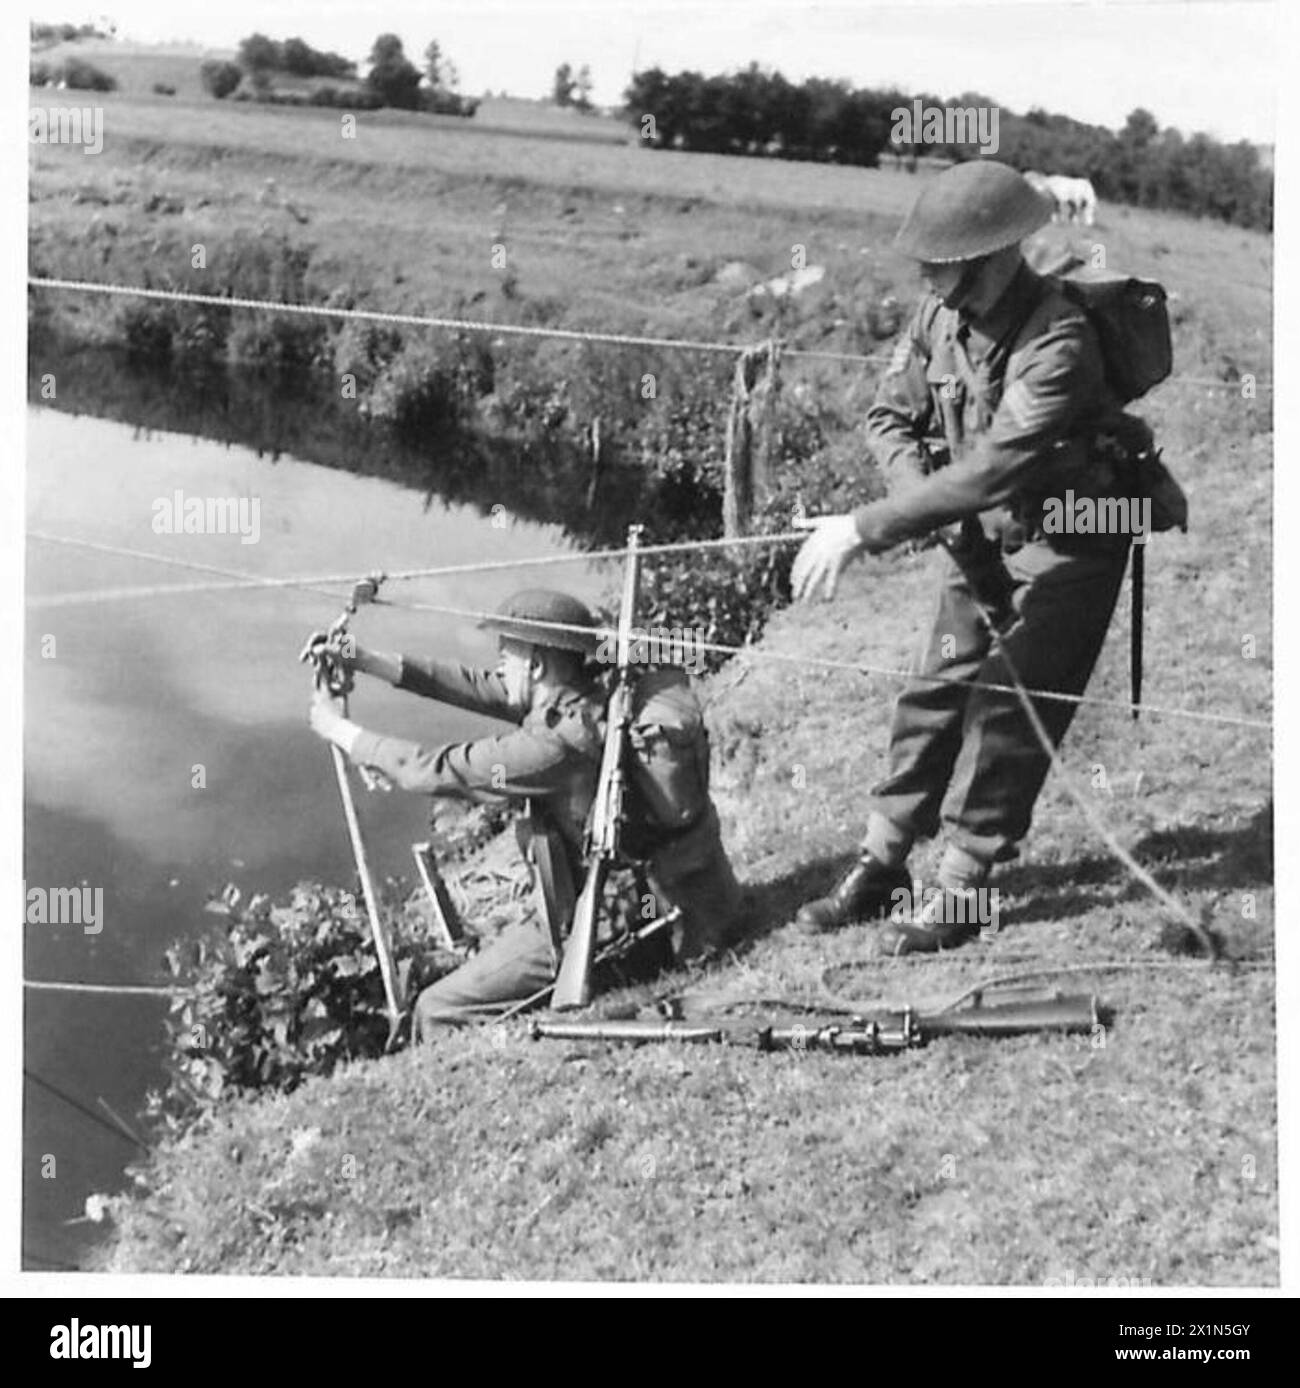 GETTING ACROSS A RIVER - A pick axe suspended from the pulley makes a first class seat on which to be hauled across the river, British Army Stock Photo